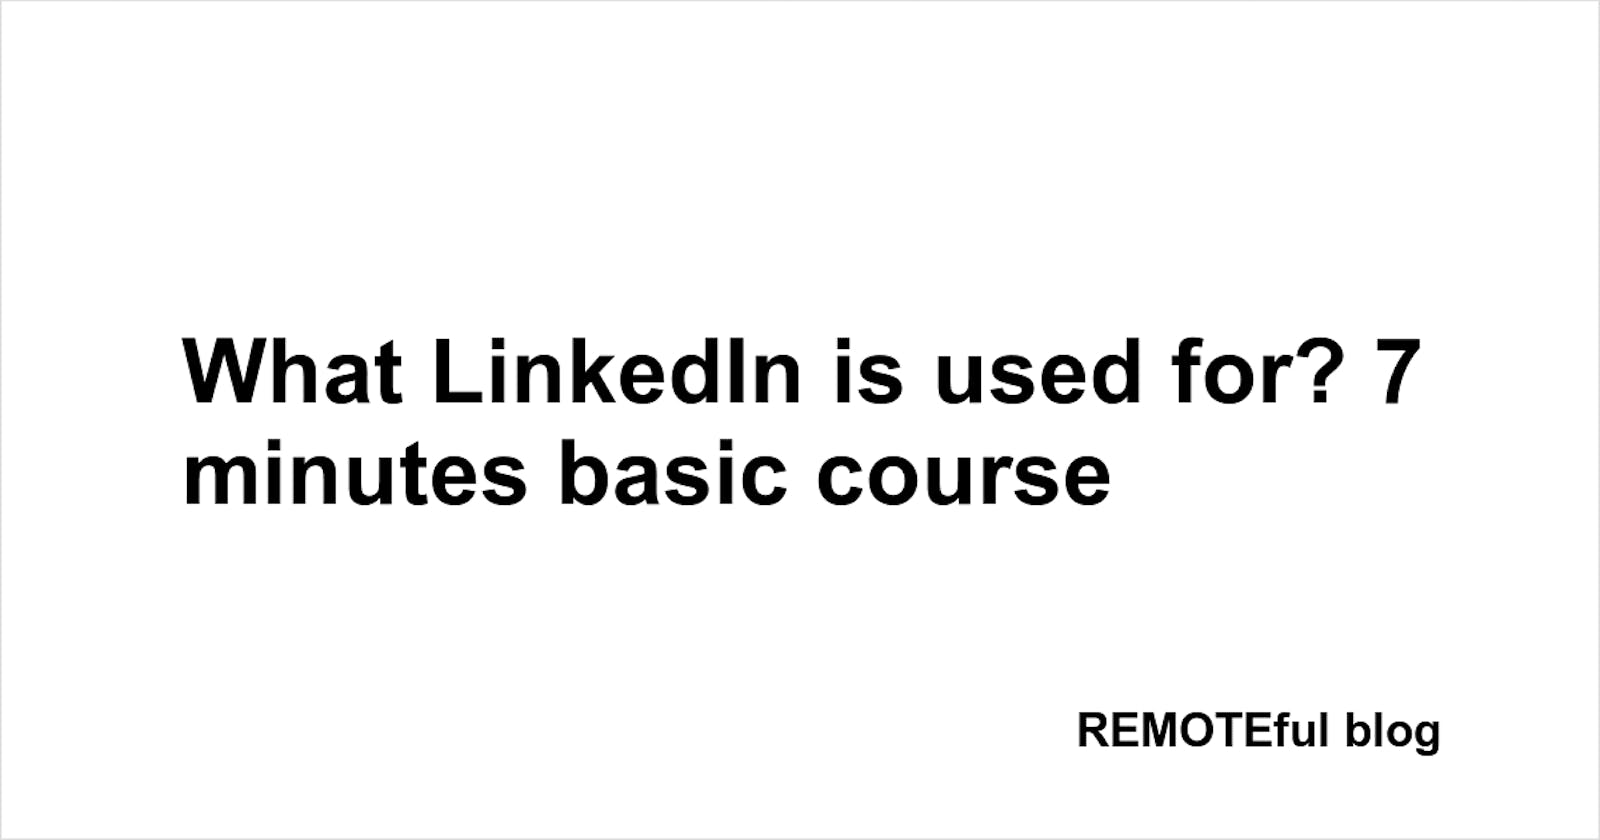 What LinkedIn is used for? 7 minutes basic course